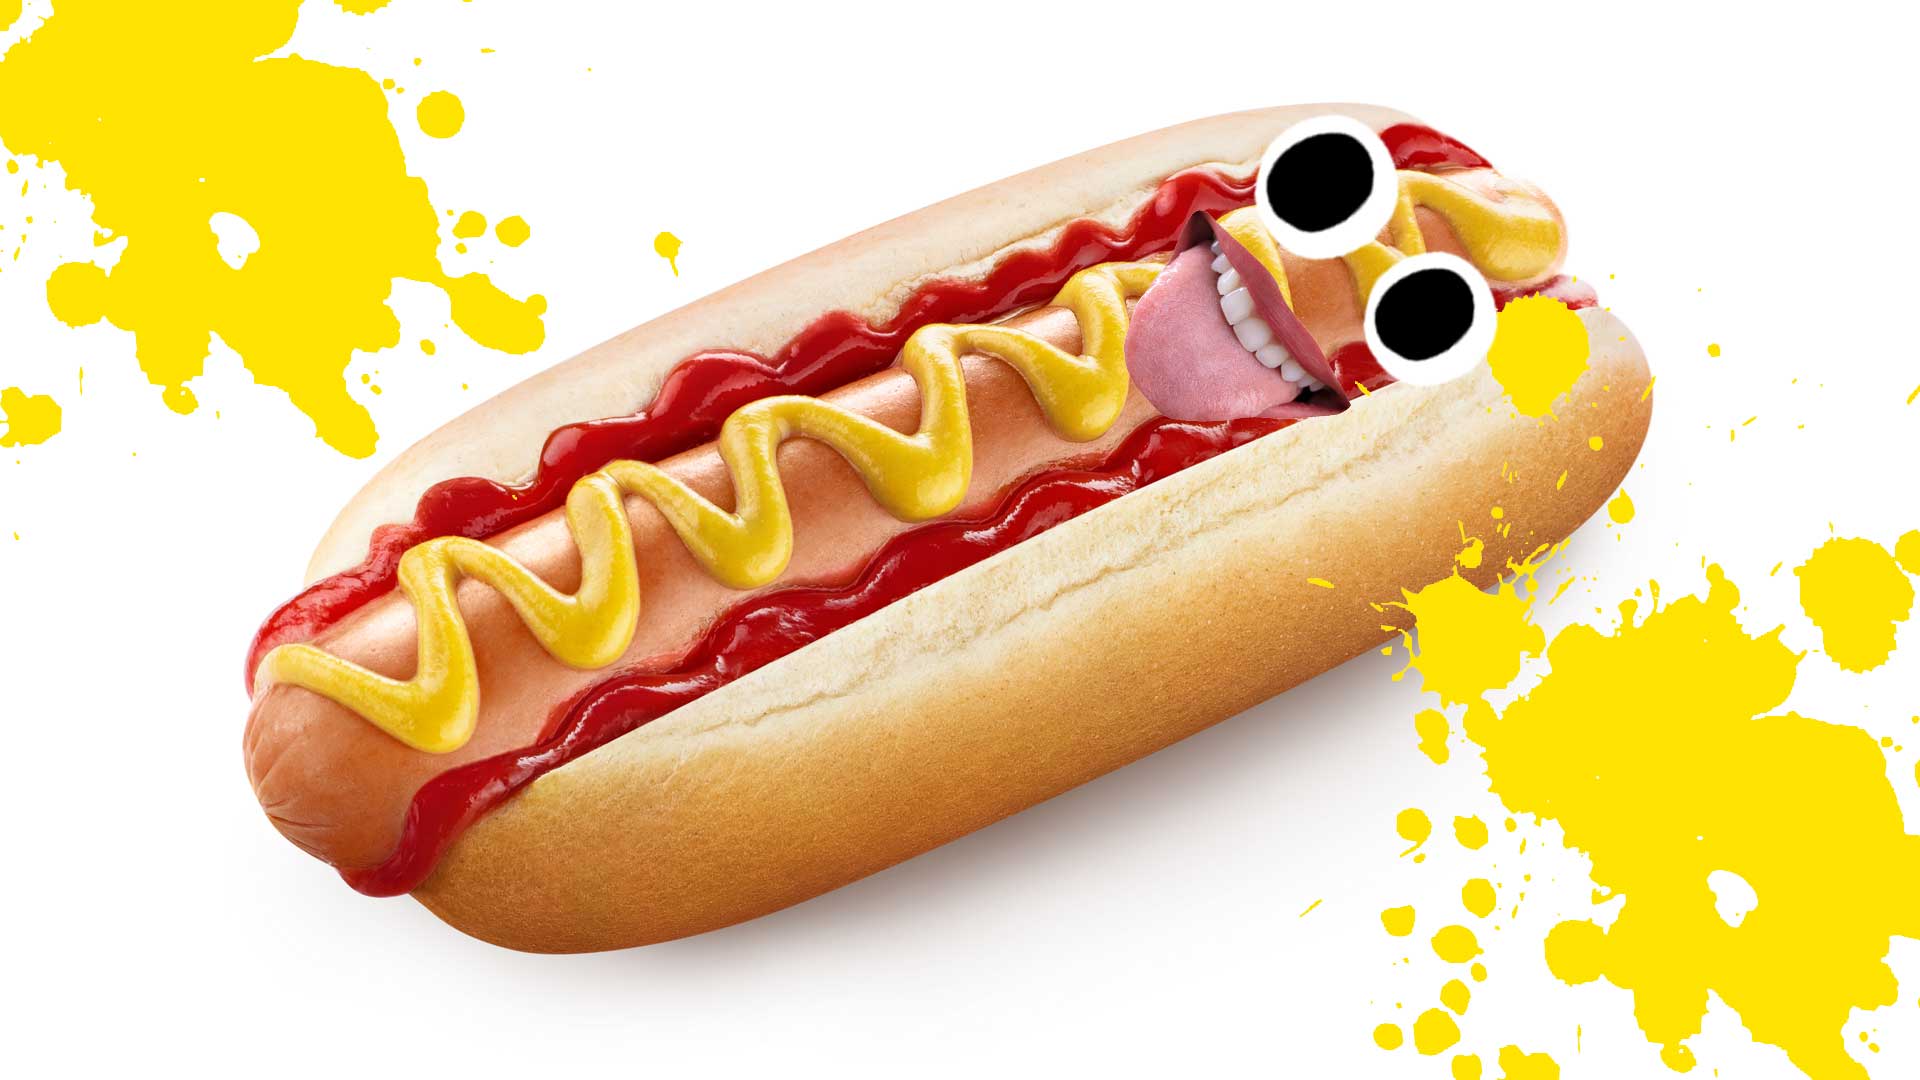 A hot dogs